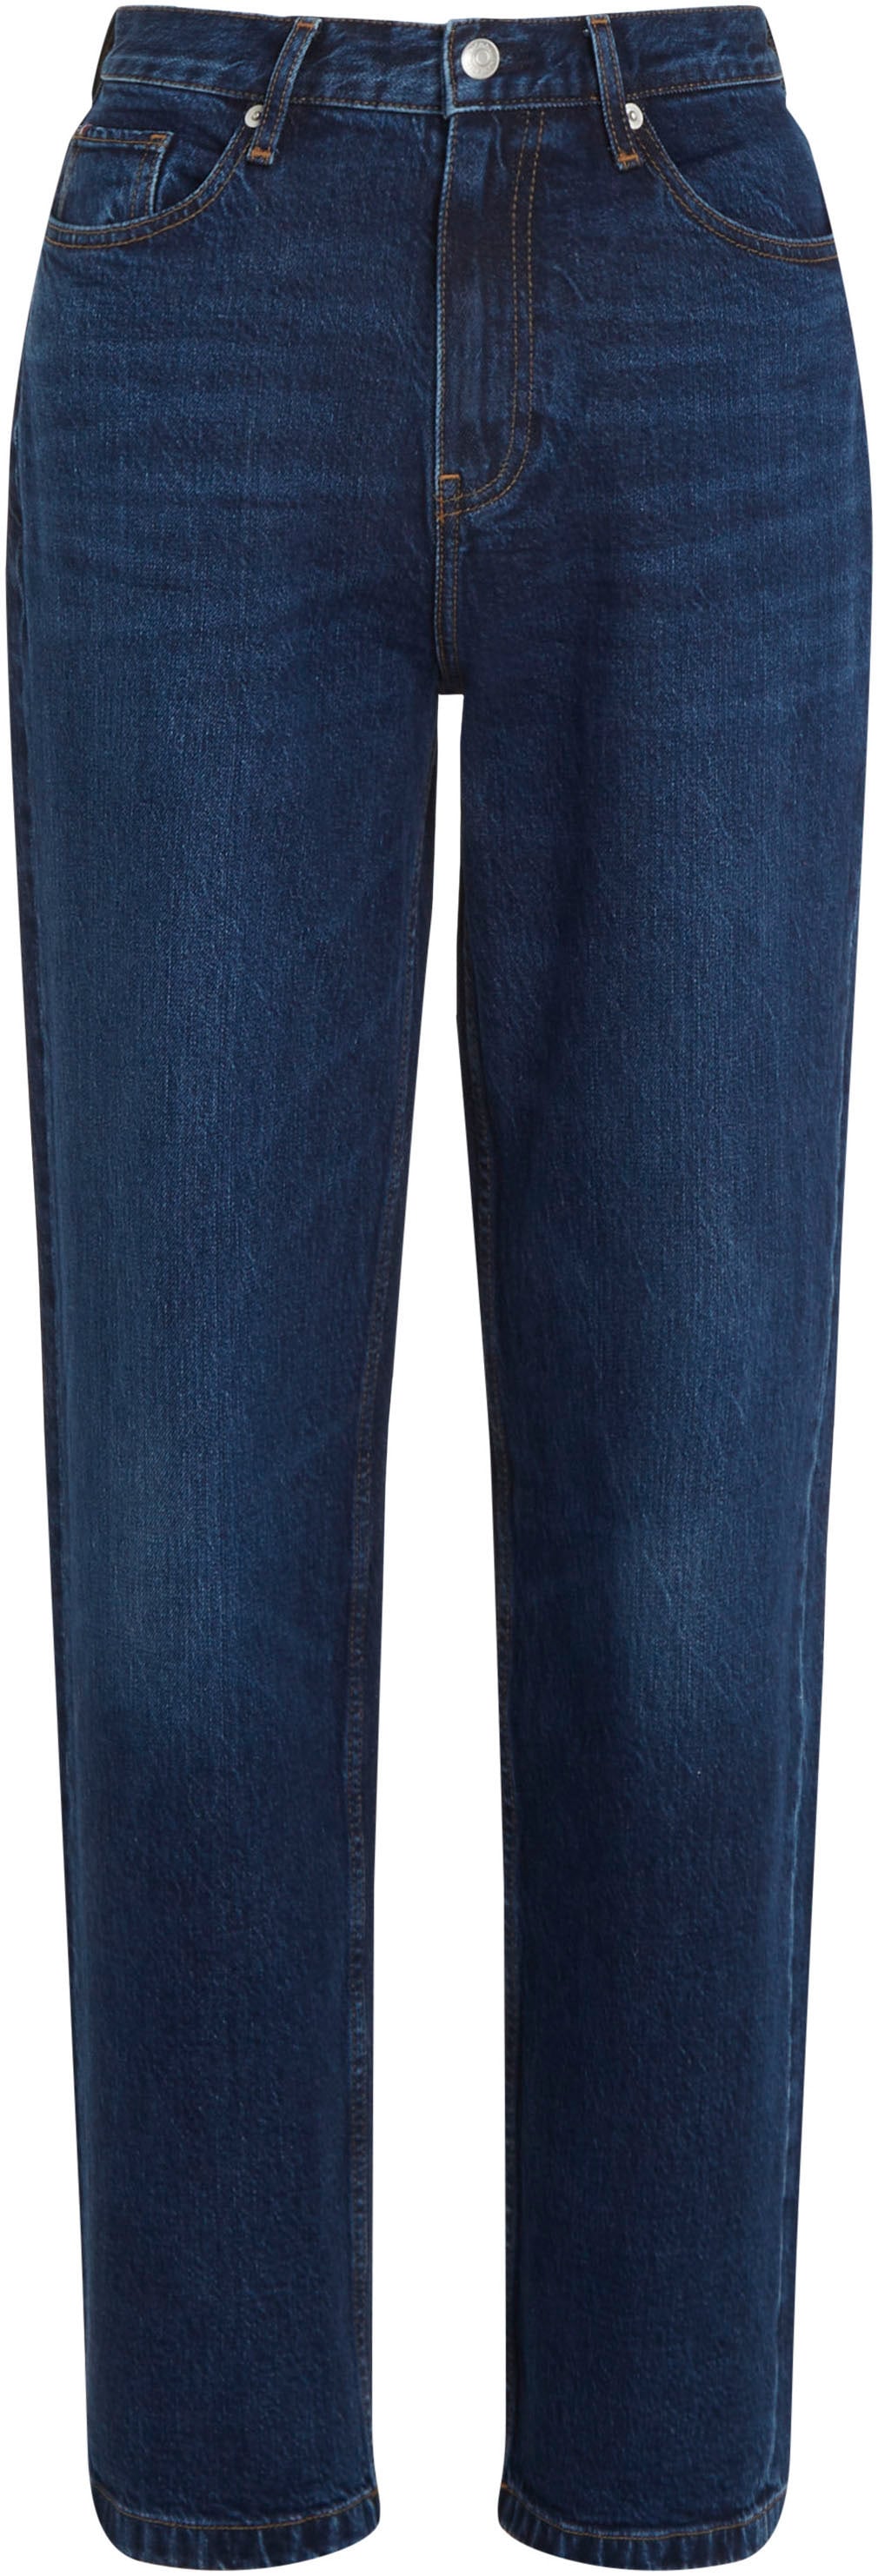 »RELAXED PAM«, HW Hilfiger in Waschung STRAIGHT Tommy weißer Relax-fit-Jeans kaufen online